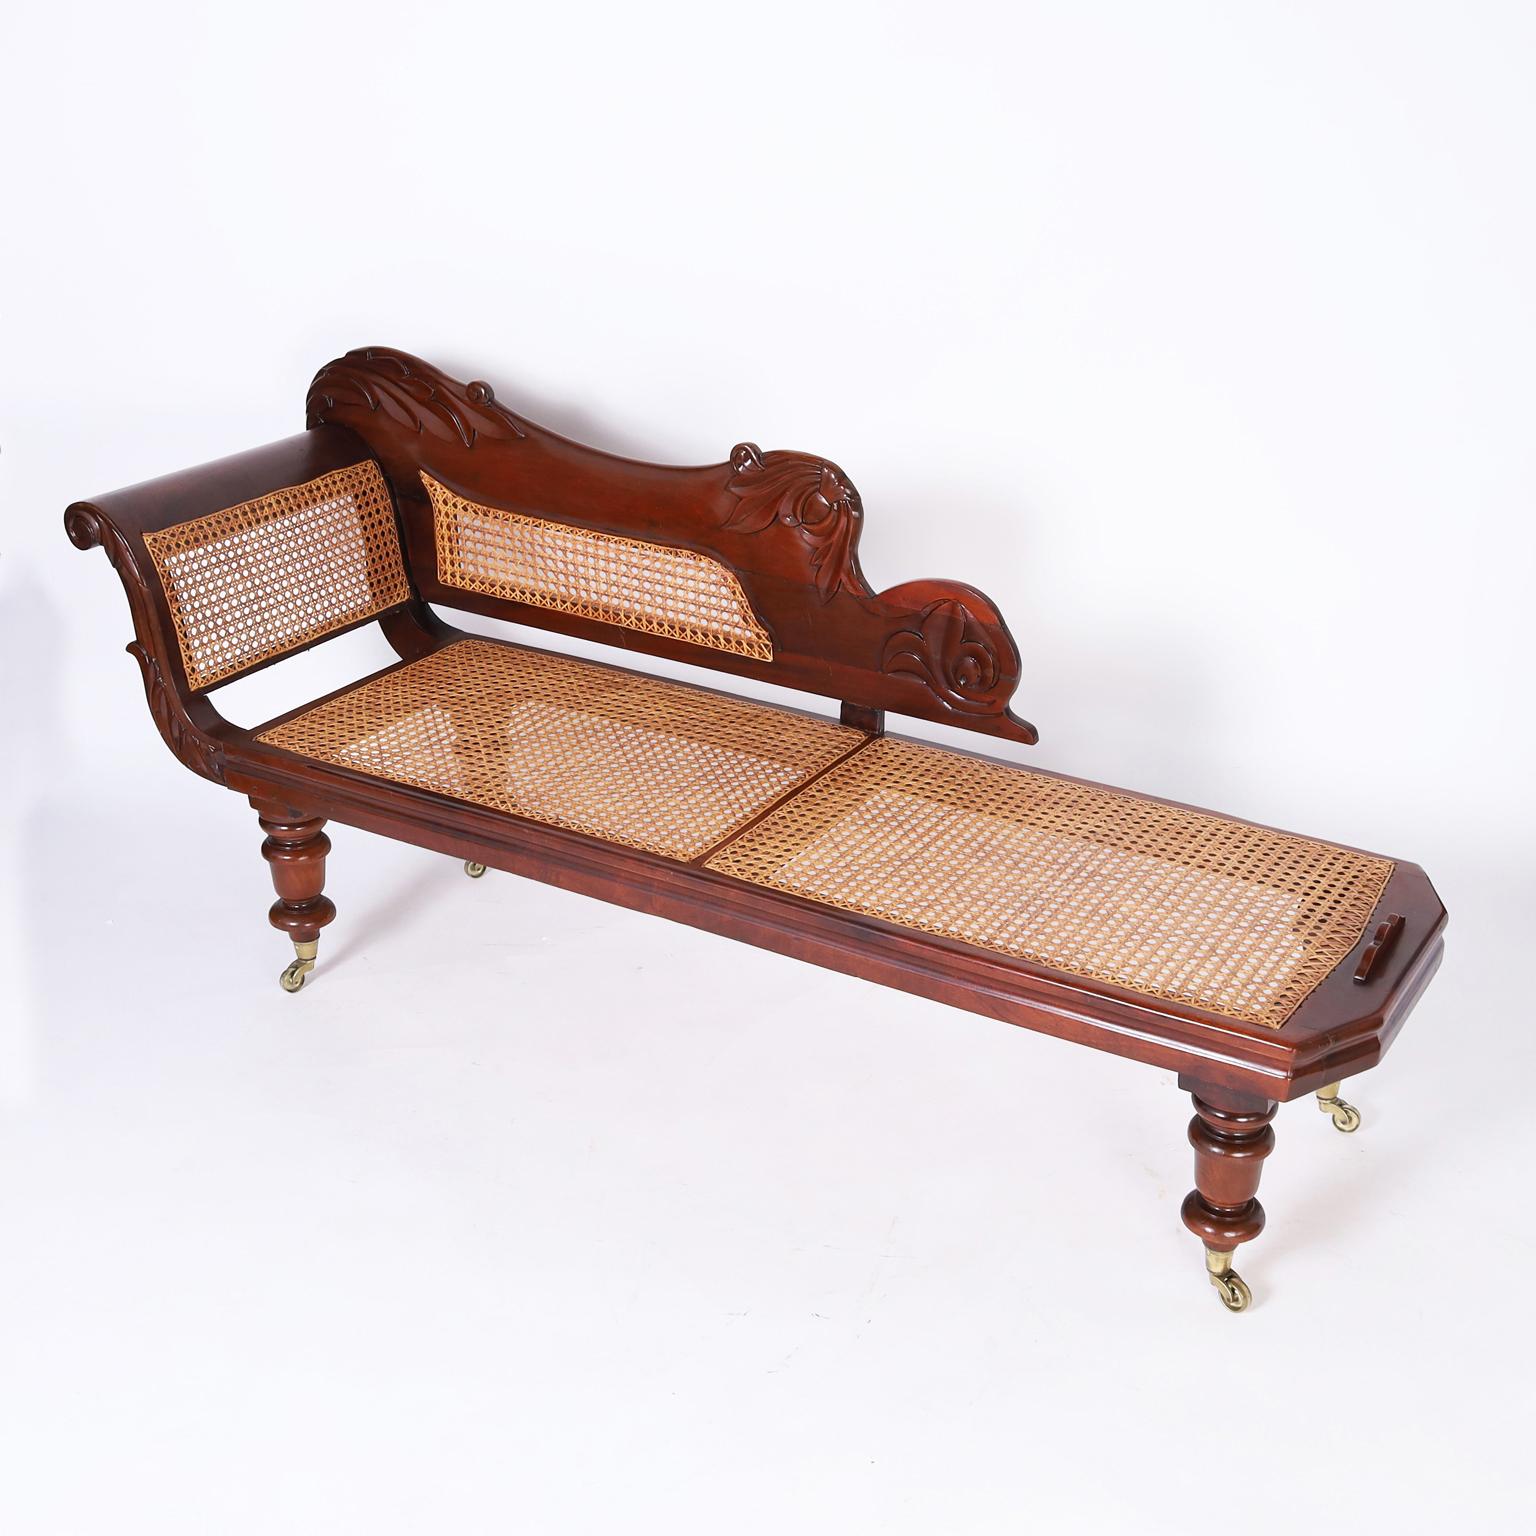 west indies style furniture